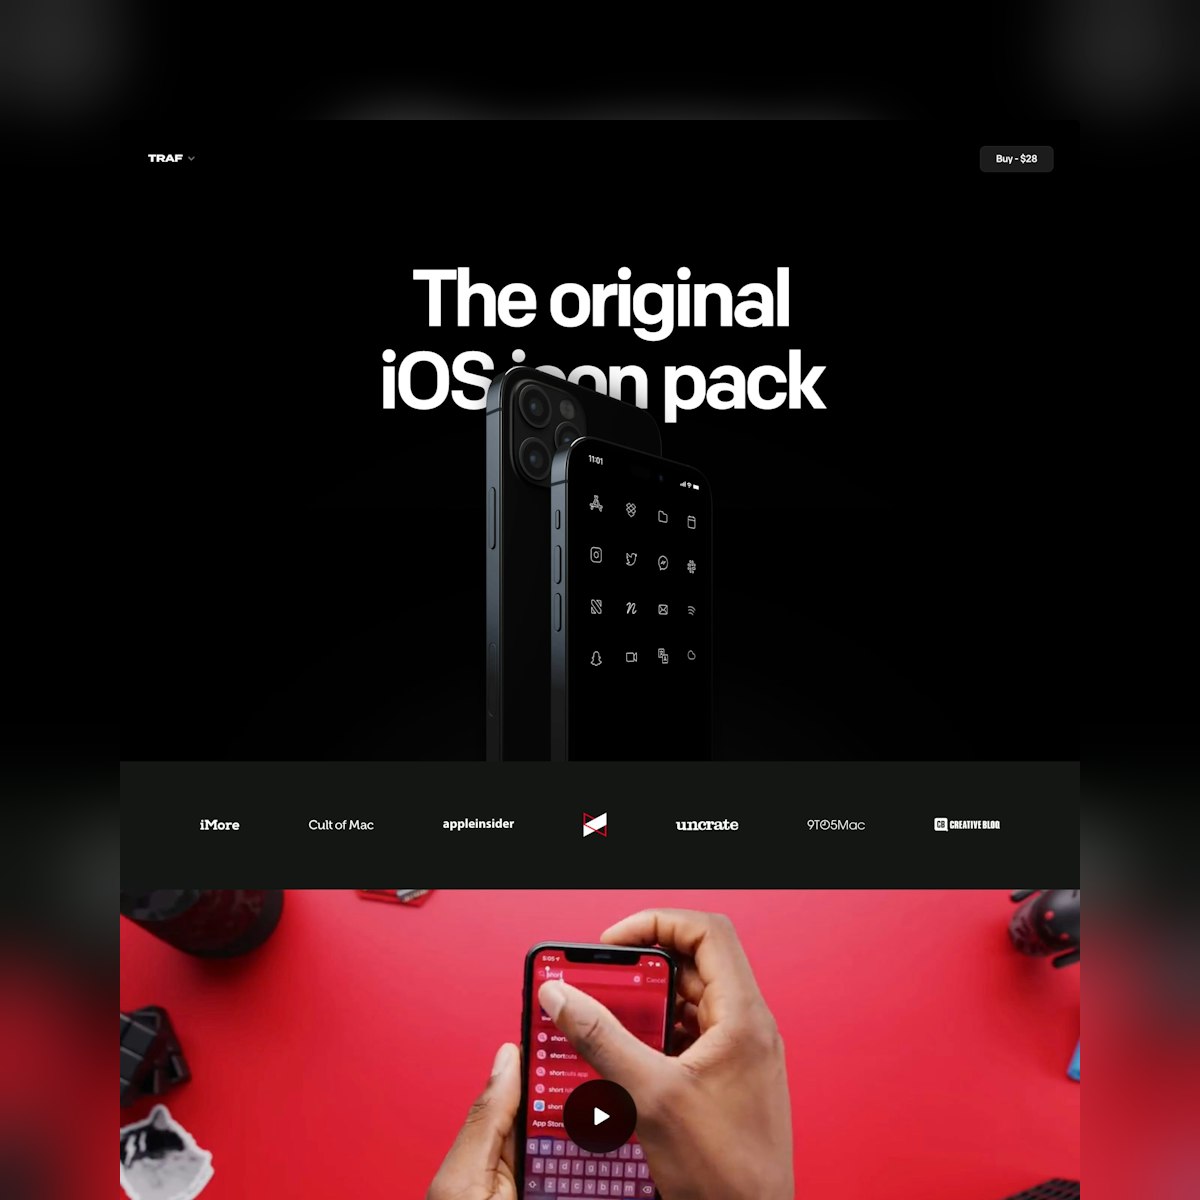 Product Page screen design idea #345: Website Inspiration: iOS Icons by Traf